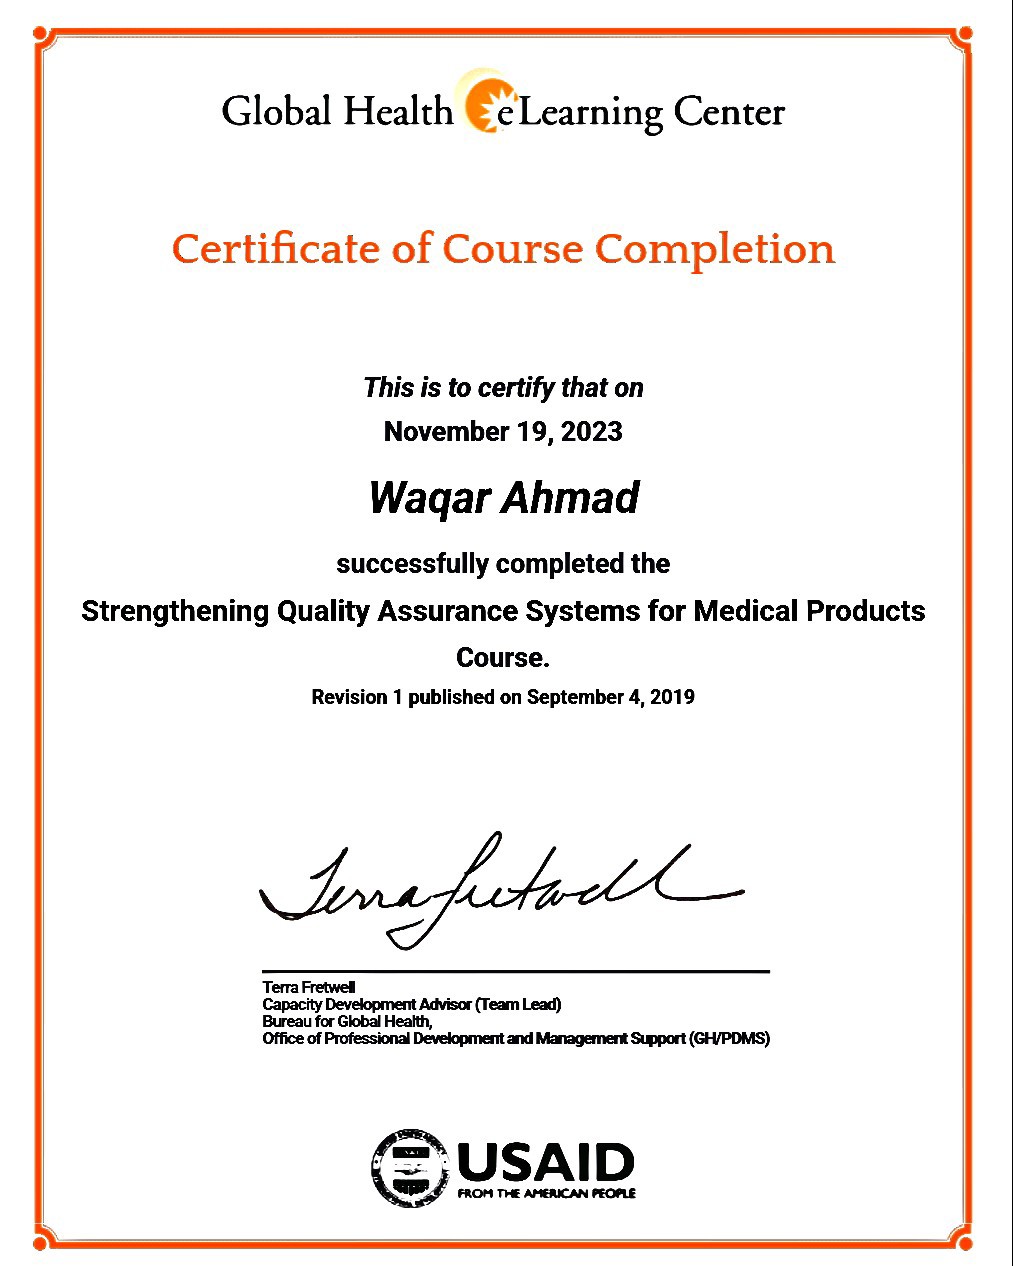 Global Health € Learning Center
Certificate of Course Completion

This is to certify that on
November 19, 2023

Waqar Ahmad

successfully completed the
Strengthening Quality Assurance Systems for Medical Products

Course.
Revision 1 published on September 4, 2019

Tina Sots

Tera Fretwed

Capactty Development Advisor (Tearn Lead)

Bureau for Global Health,

Office of Professional Development and Management Support (GH/POMS)

\&/ (= USAID

FROM TE AMERICAN ORE